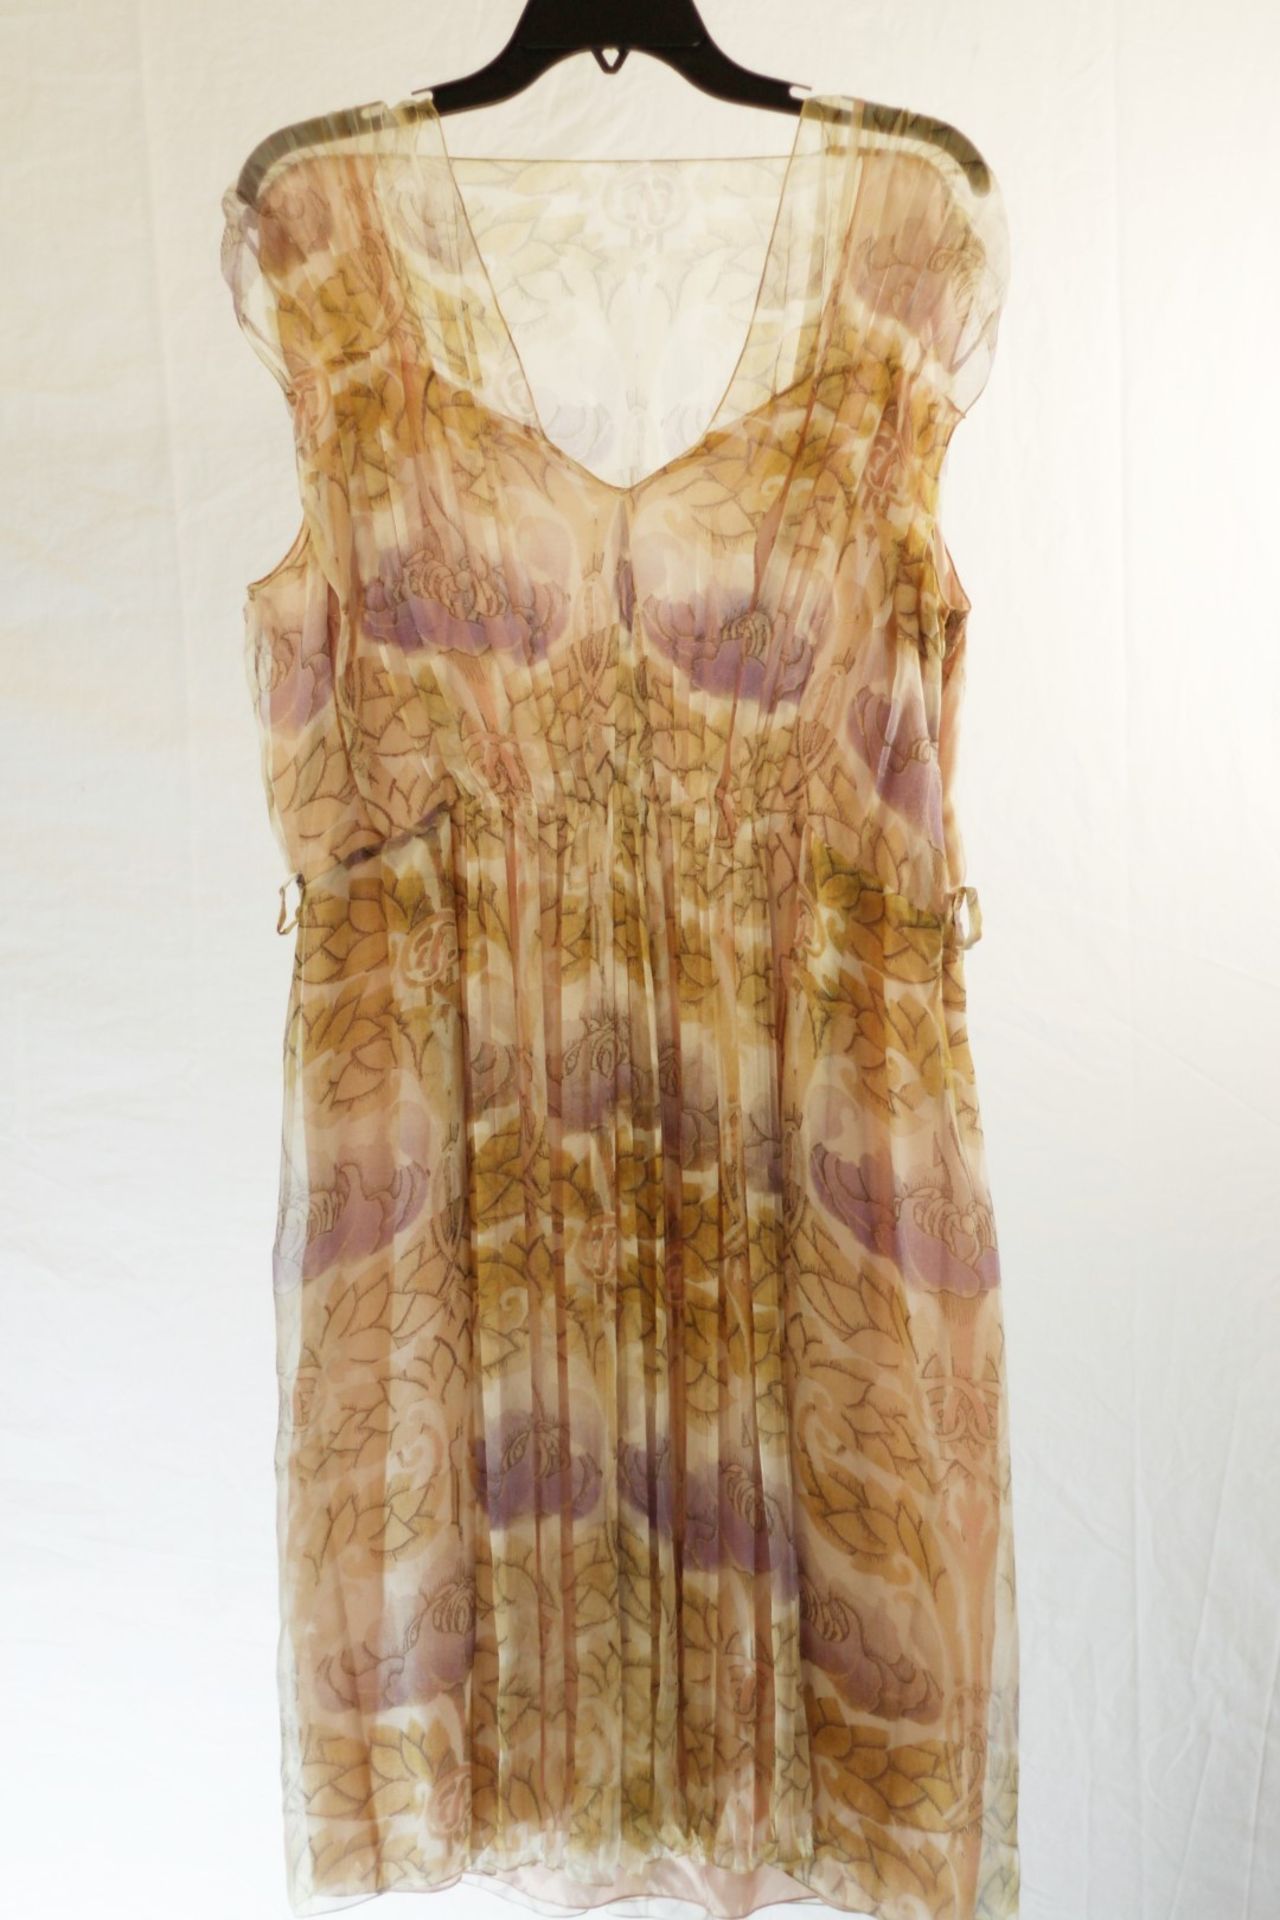 1 x Alberta Ferretti Dusted Rose Dress - Size: 16 - Material: 100% Silk - From a High End Clothing - Image 2 of 3